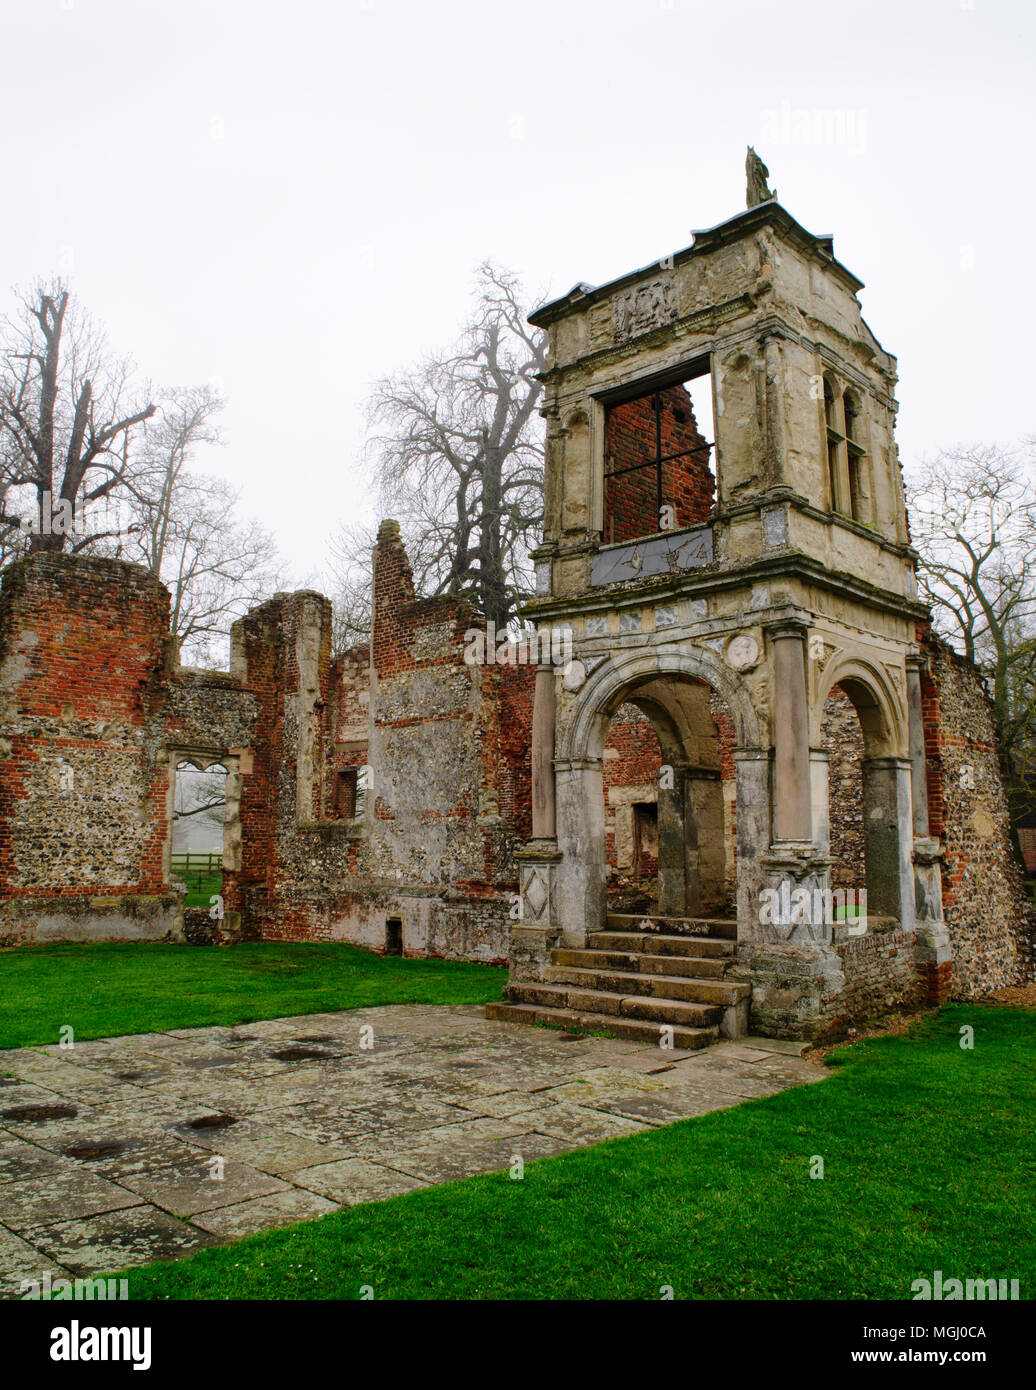 View NW of Old Gorhambury House (C16th), St Albans, England, UK, showing the two-storey Classical porch leading into the hall from the S courtyard. Stock Photo